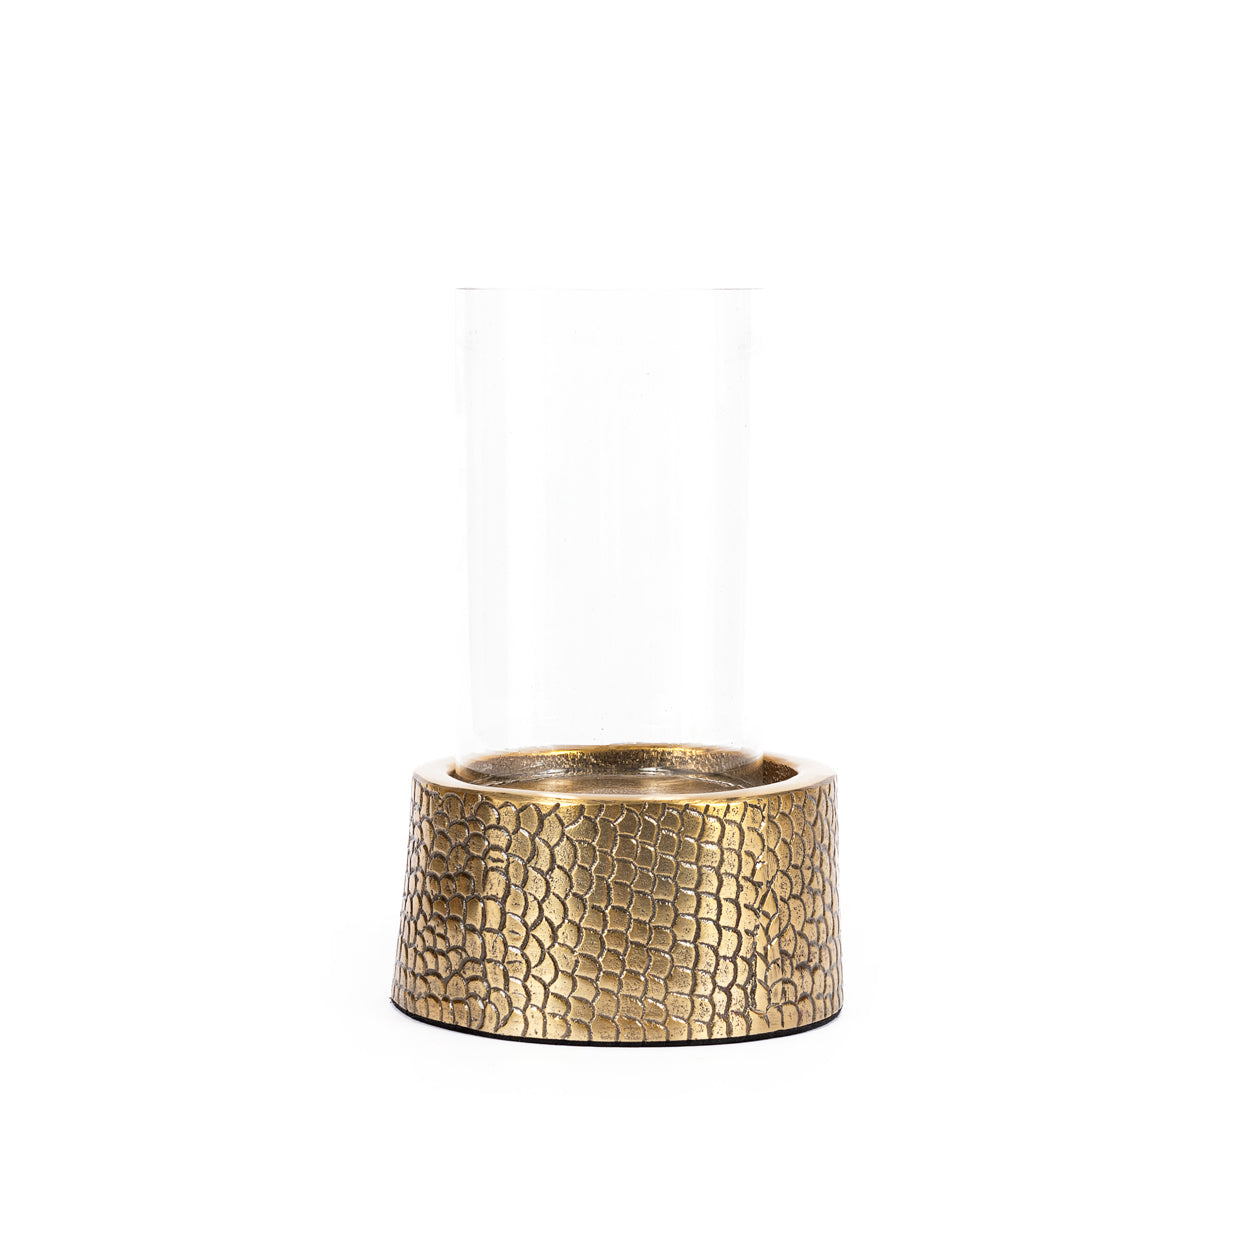 THE CROCO Candle Holder with Glass one large